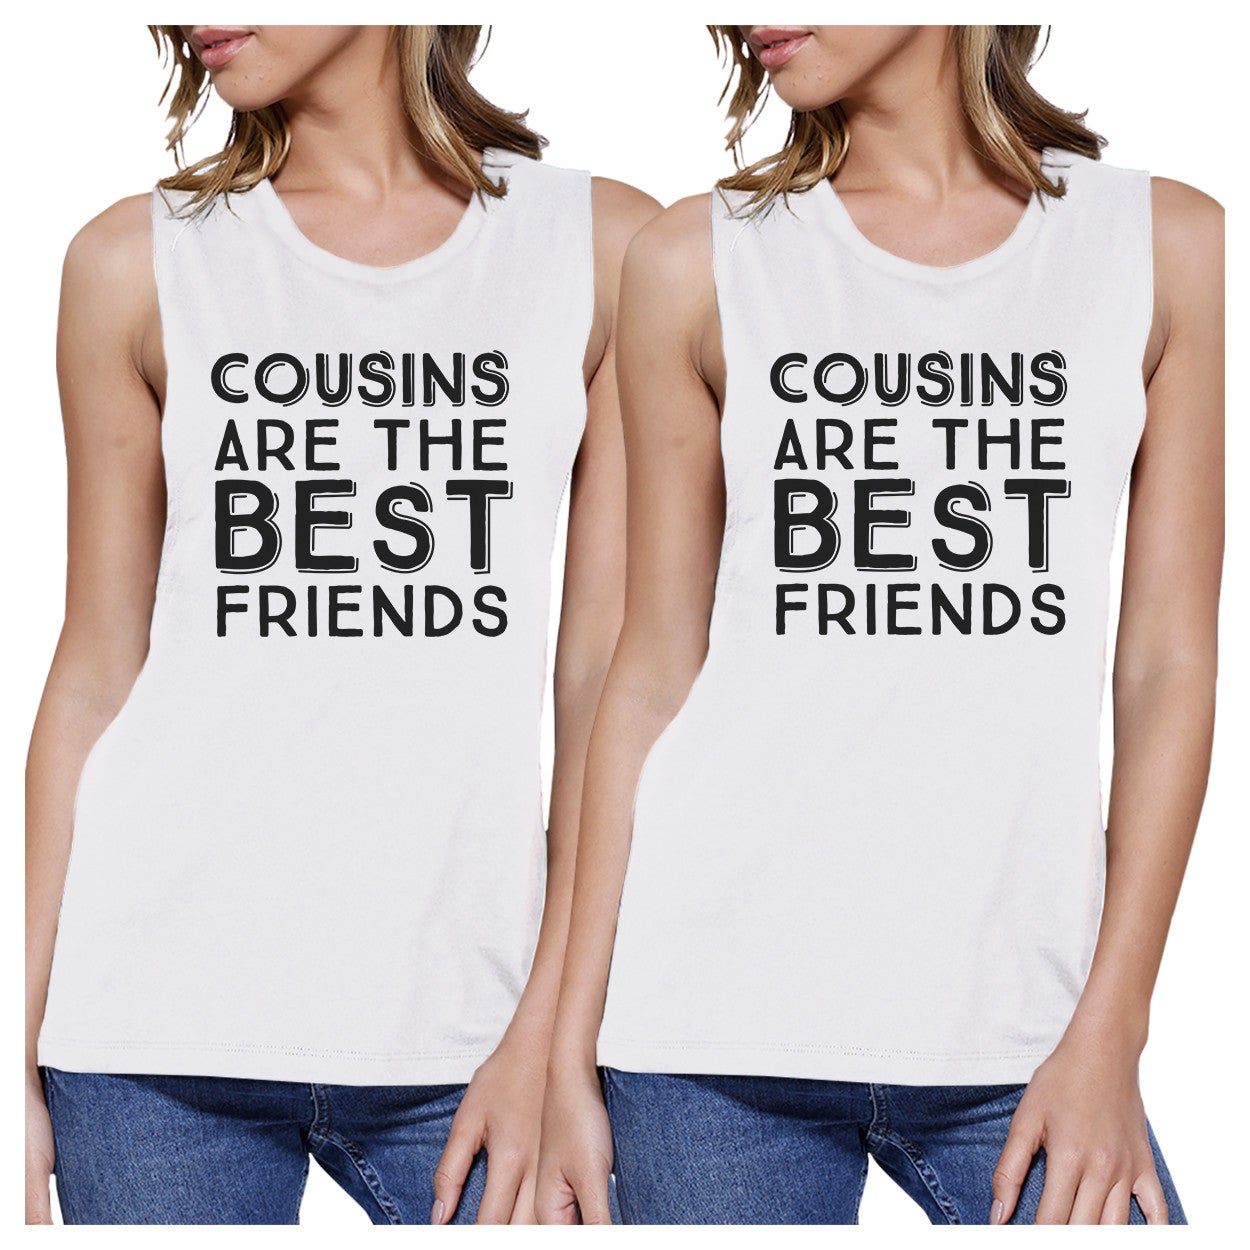 Cousins Are The Best Friends BFF Matching White Muscle Tops